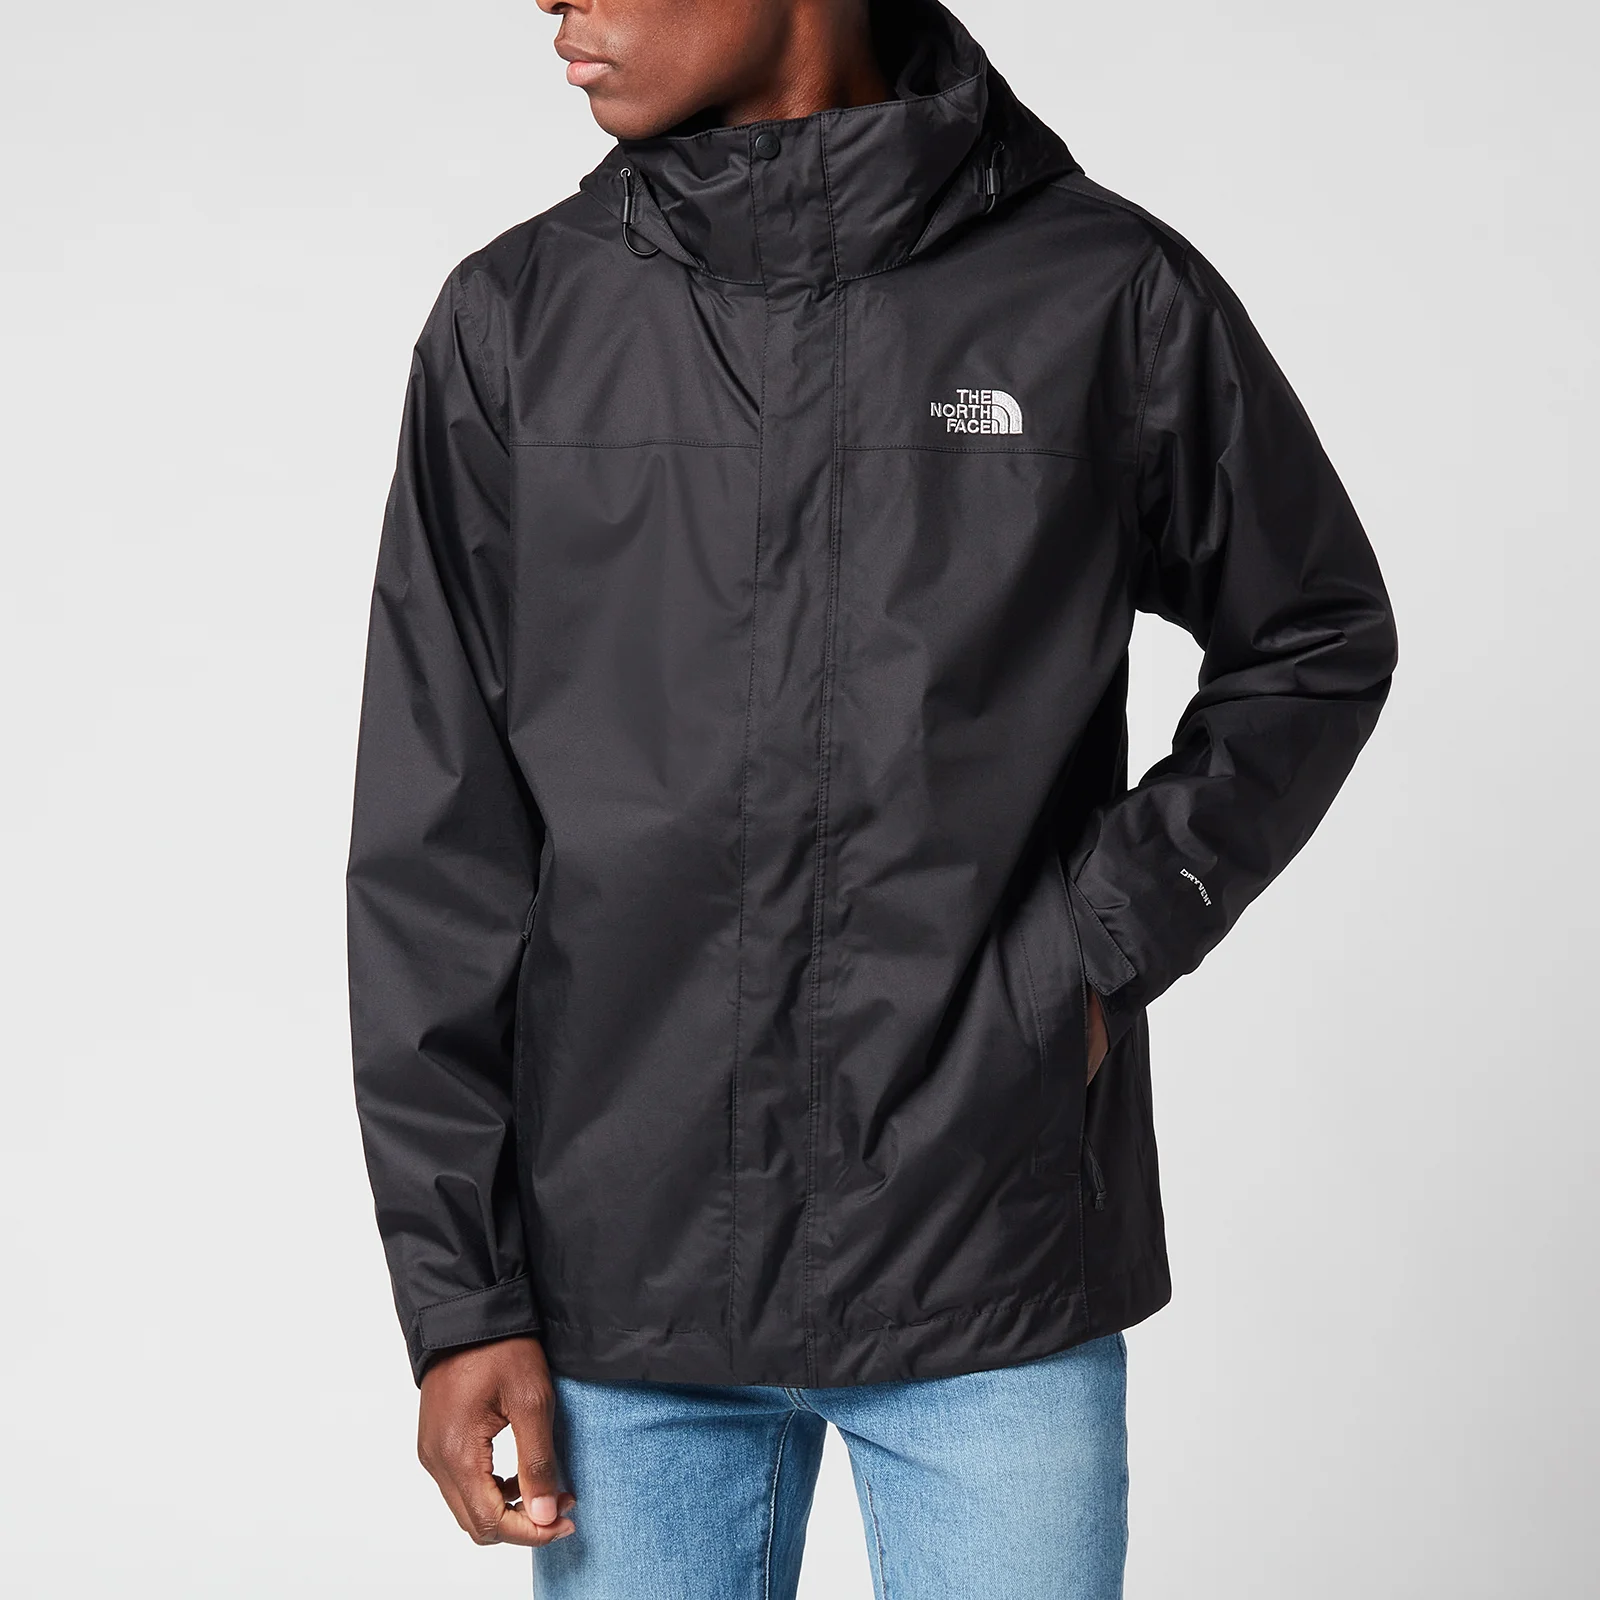 The North Face Men's Evolve Ll Triclimate Jacket - TNF Black Image 1